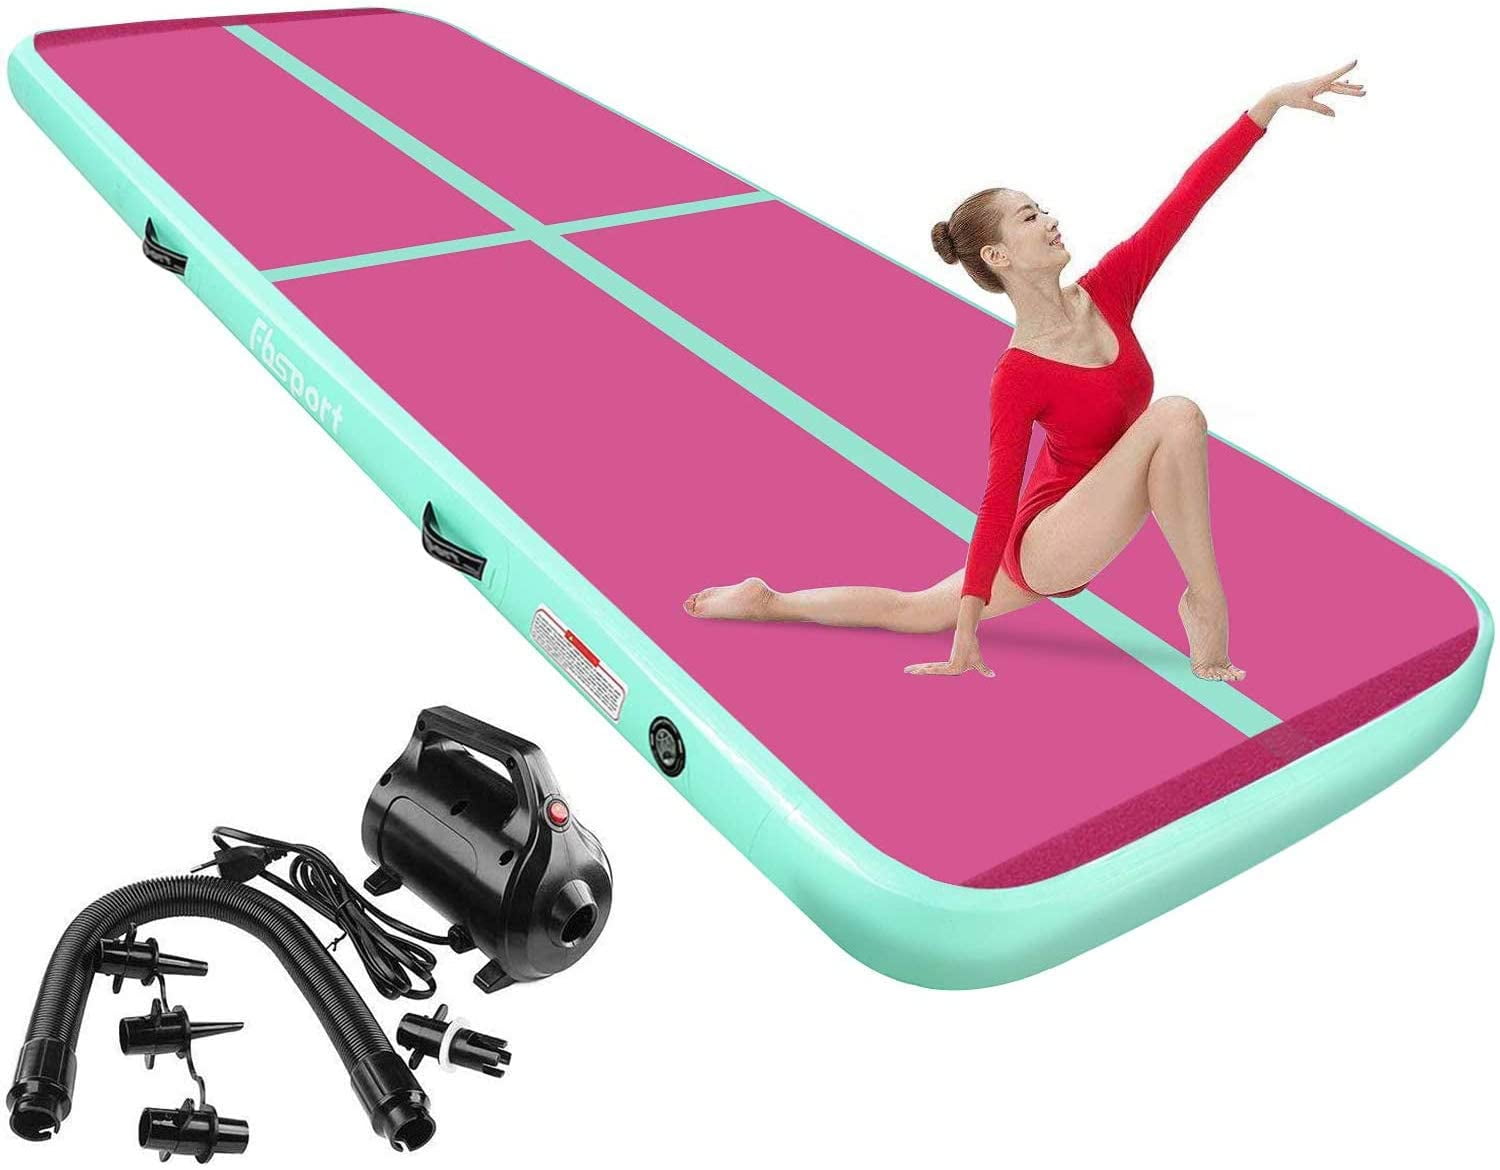 FBSPORT 8inches/4 inches Thickness airtrack mat,26ft/23ft/20ft/17ft/13ft/10ft Tumble Track air mat for Gymnastics Training/Home Use/Cheerleading/Yoga/Water with Electric Pump 